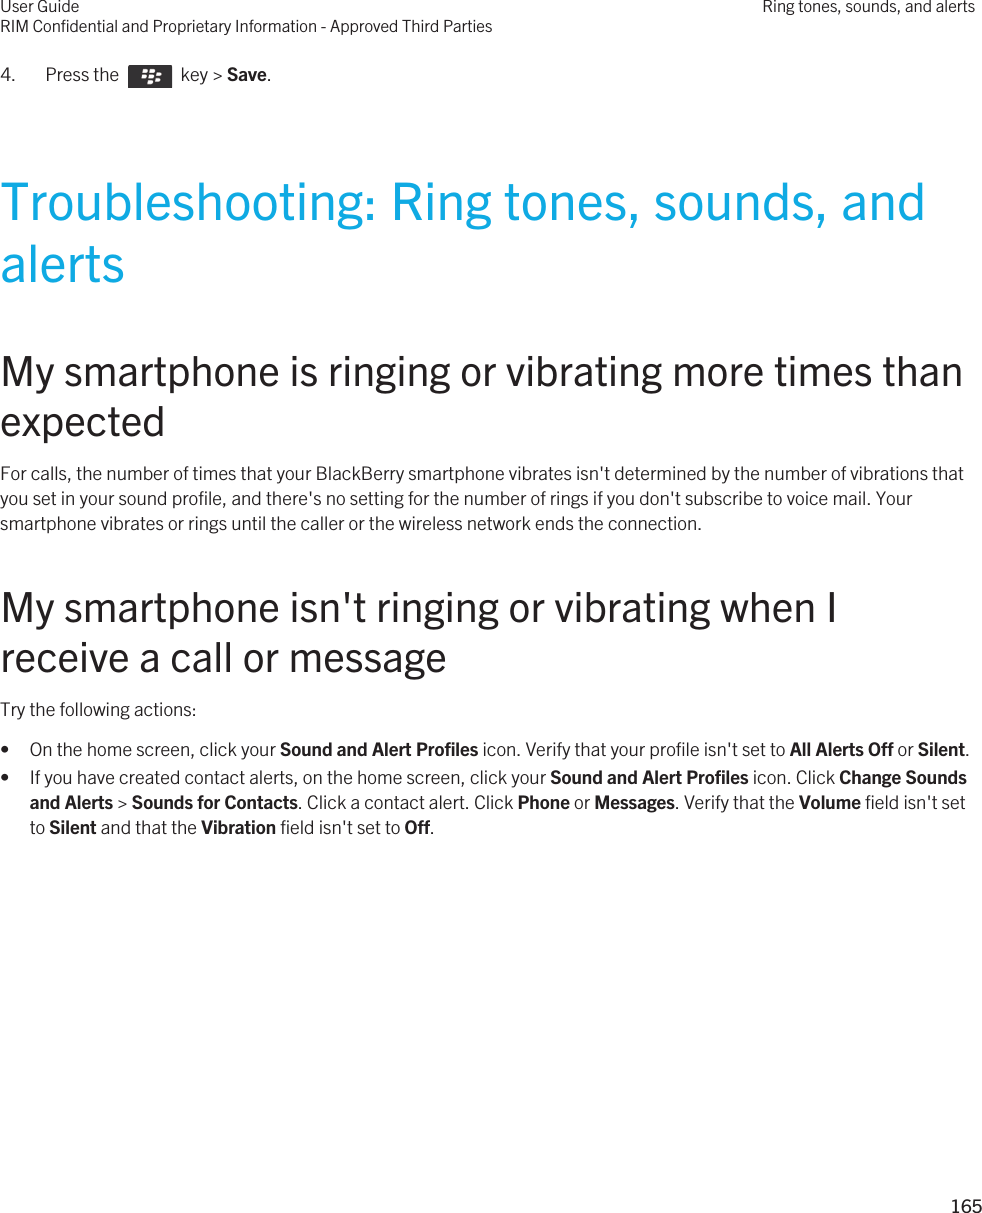 4.  Press the    key &gt; Save. Troubleshooting: Ring tones, sounds, and alertsMy smartphone is ringing or vibrating more times than expectedFor calls, the number of times that your BlackBerry smartphone vibrates isn&apos;t determined by the number of vibrations that you set in your sound profile, and there&apos;s no setting for the number of rings if you don&apos;t subscribe to voice mail. Your smartphone vibrates or rings until the caller or the wireless network ends the connection.My smartphone isn&apos;t ringing or vibrating when I receive a call or messageTry the following actions:• On the home screen, click your Sound and Alert Profiles icon. Verify that your profile isn&apos;t set to All Alerts Off or Silent.• If you have created contact alerts, on the home screen, click your Sound and Alert Profiles icon. Click Change Sounds and Alerts &gt; Sounds for Contacts. Click a contact alert. Click Phone or Messages. Verify that the Volume field isn&apos;t set to Silent and that the Vibration field isn&apos;t set to Off.User GuideRIM Confidential and Proprietary Information - Approved Third PartiesRing tones, sounds, and alerts165 